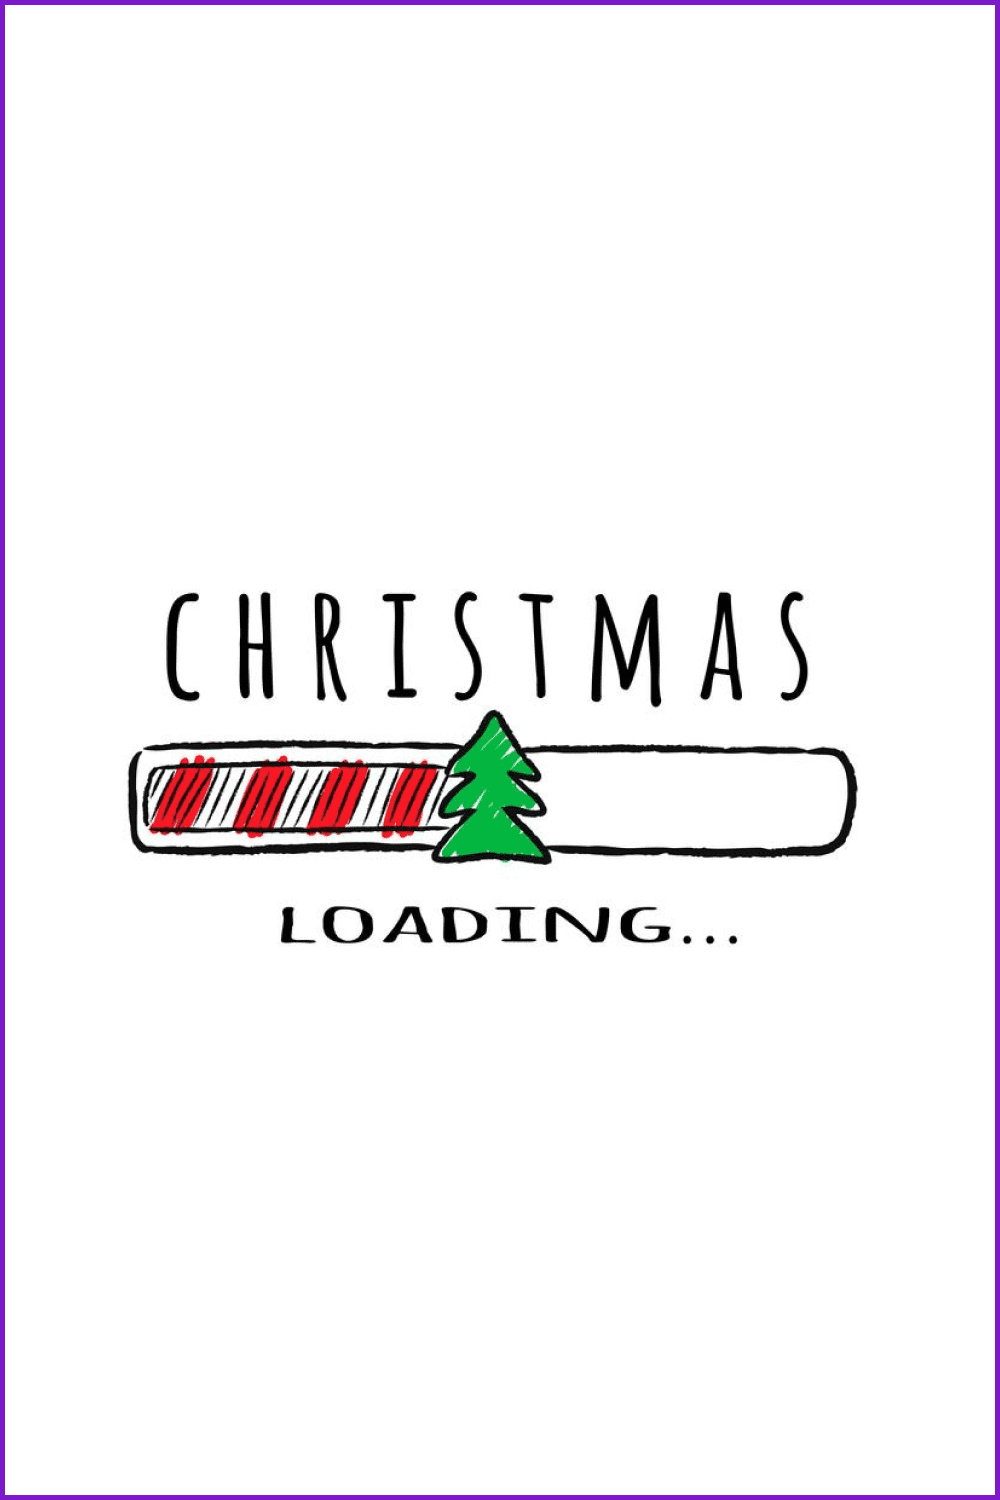 Progress bar with inscription Christmas loading on a white background.